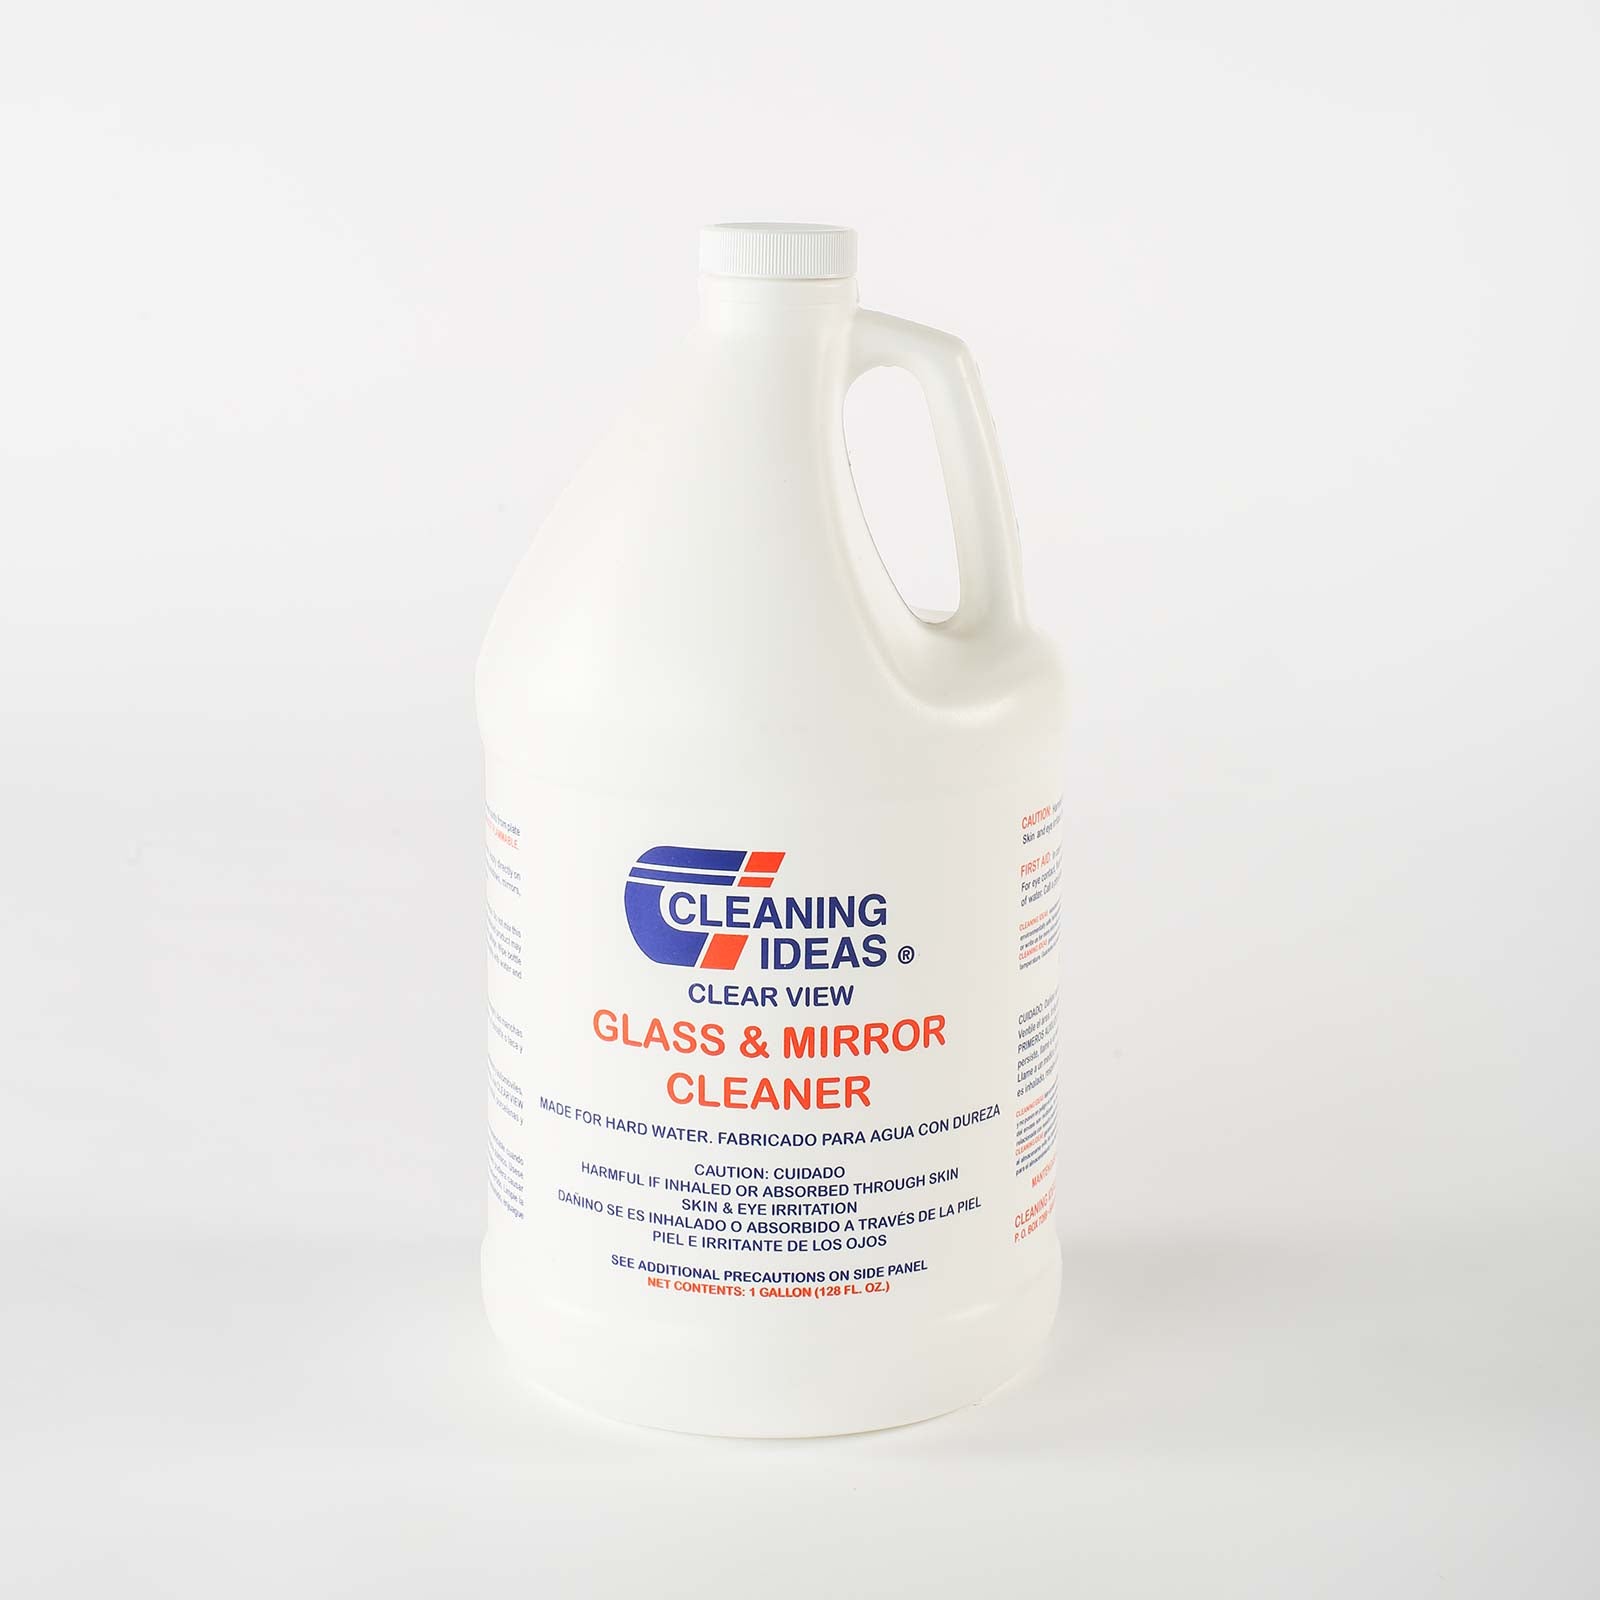 Oven Brite Ready-to-Use Oven Cleaner - 32 oz.